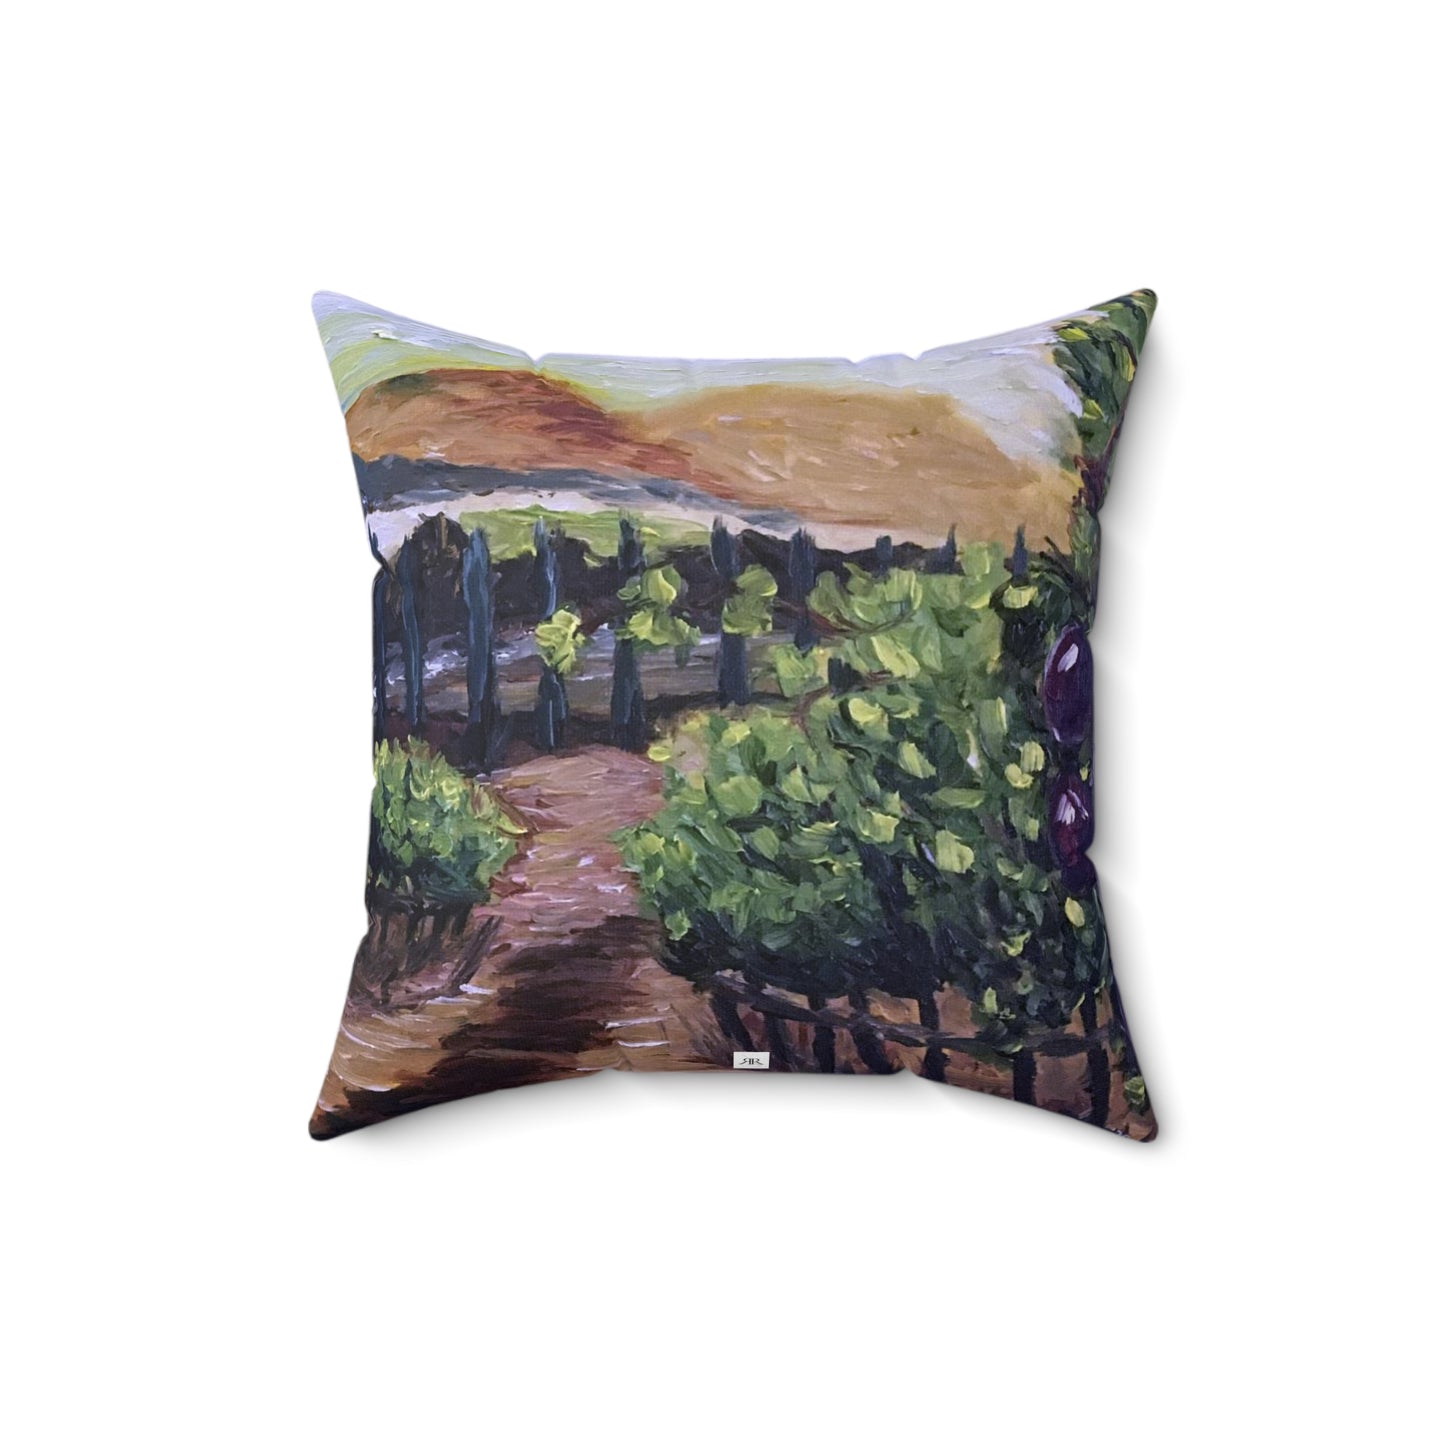 Afternoon Vines Indoor Spun Polyester Square Pillow